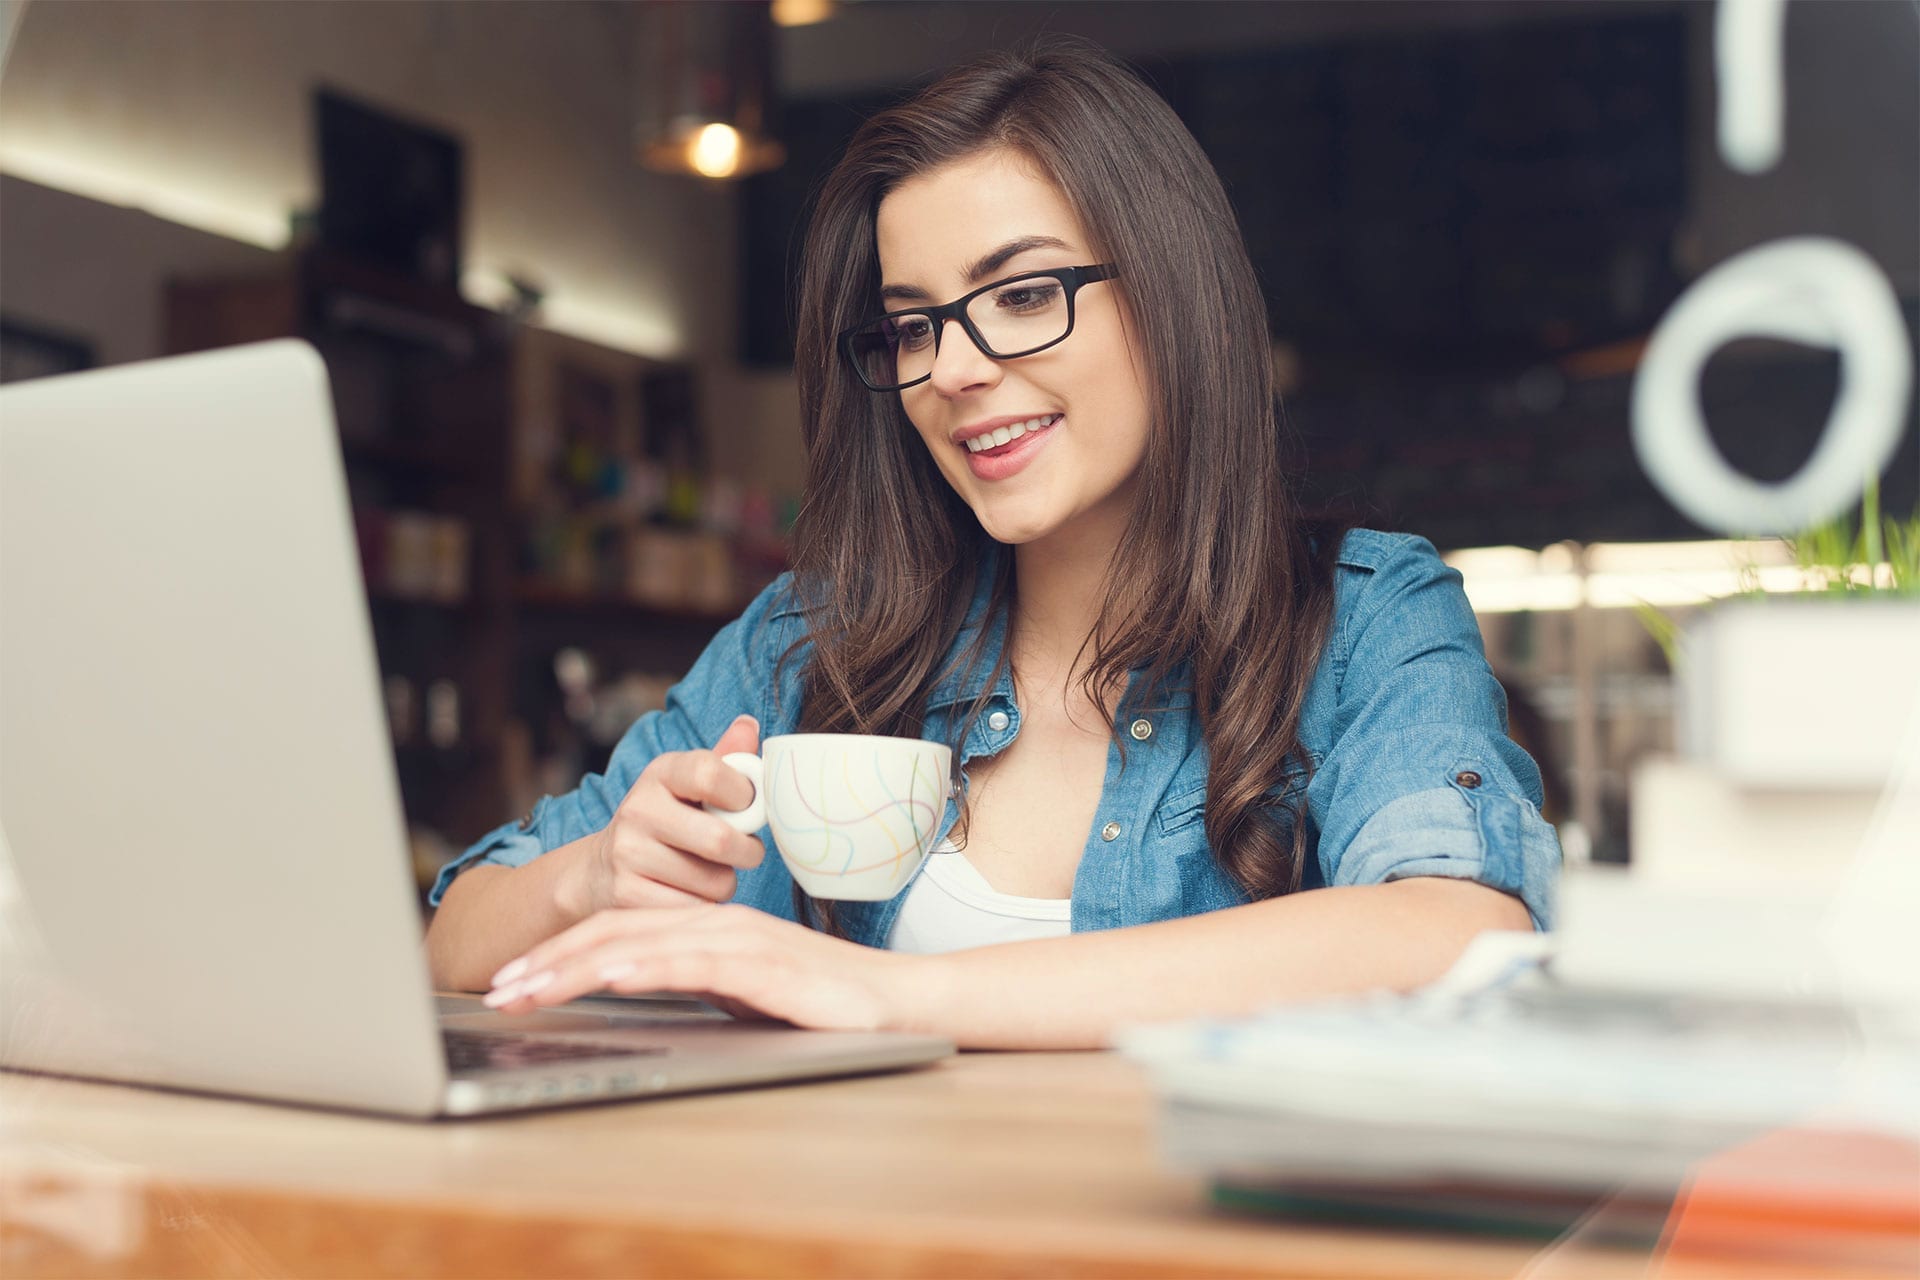 Smiling woman using laptop to run an online business